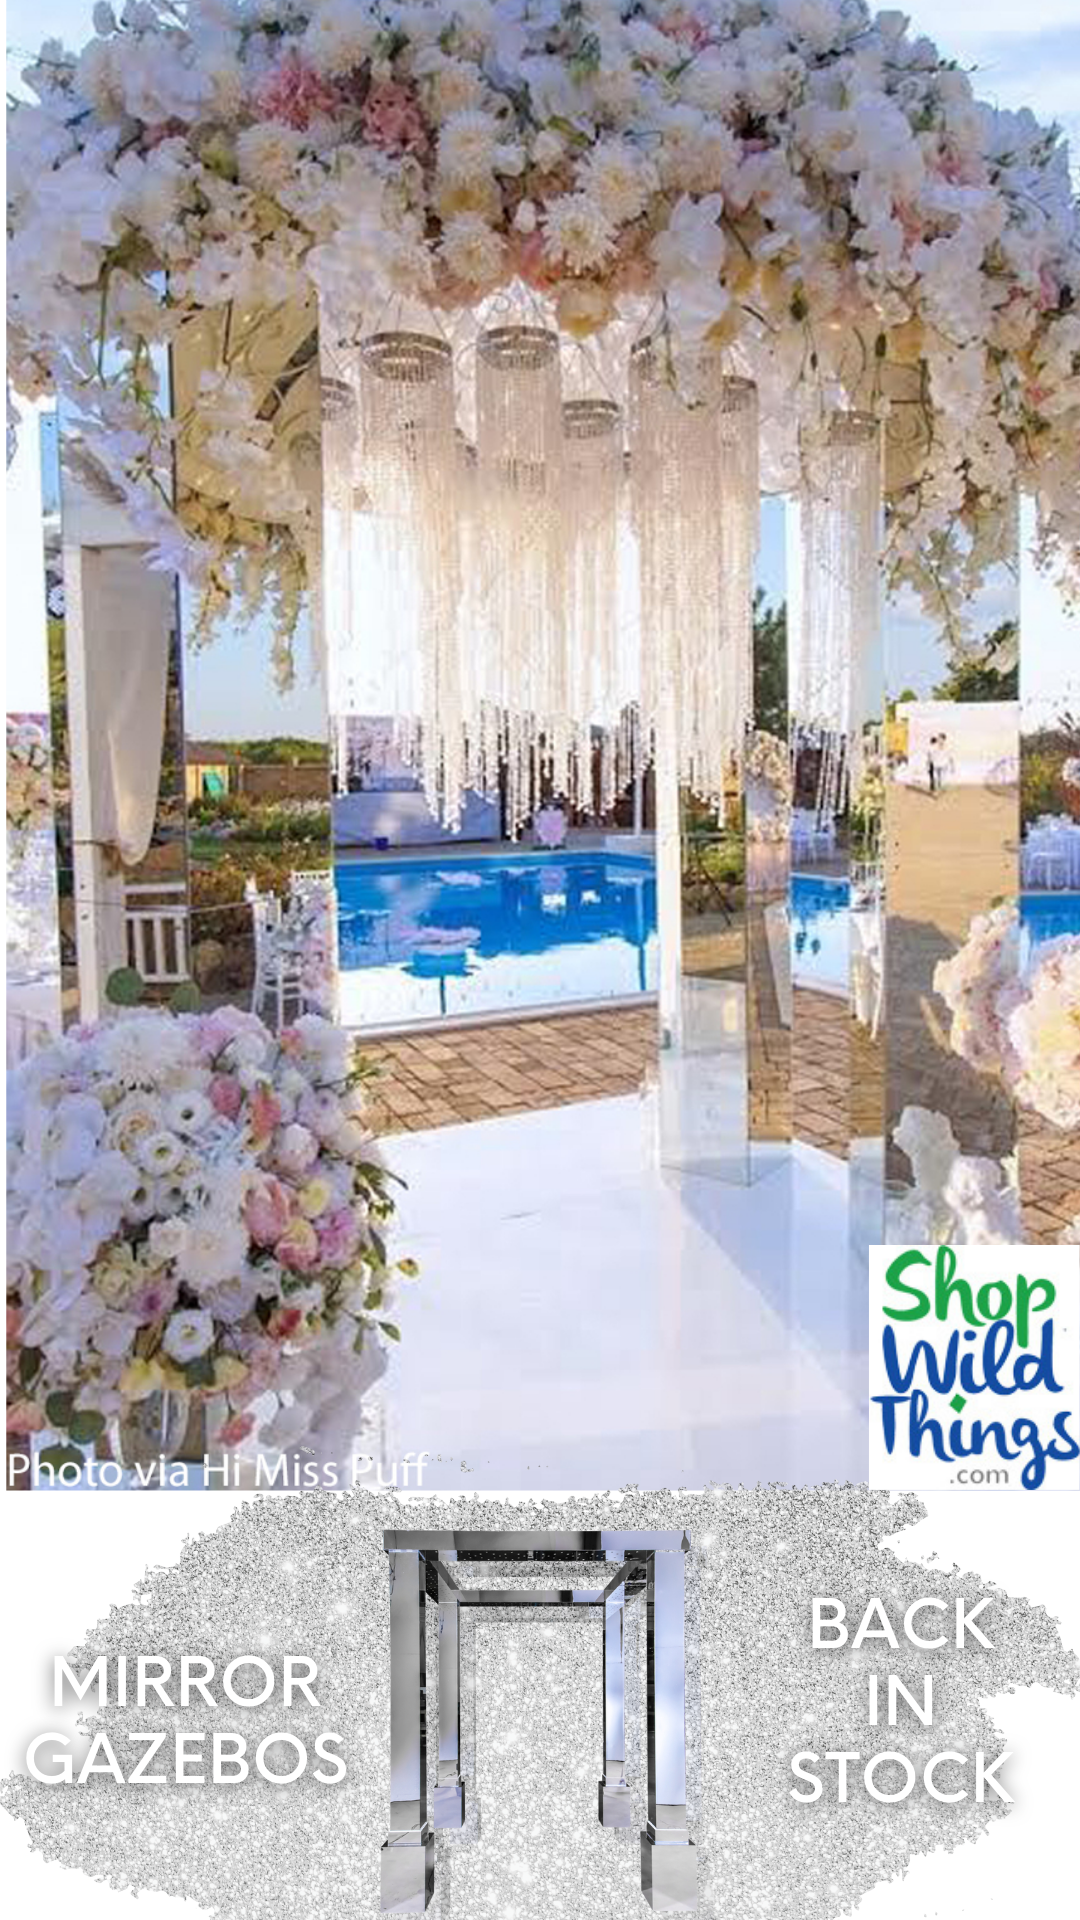 Silver Mirror Wedding Gazebo by ShopWildThings is perfect for creating WOW moments at events. Don't need a full gazebo? We carry a silver mirror arch that matches!